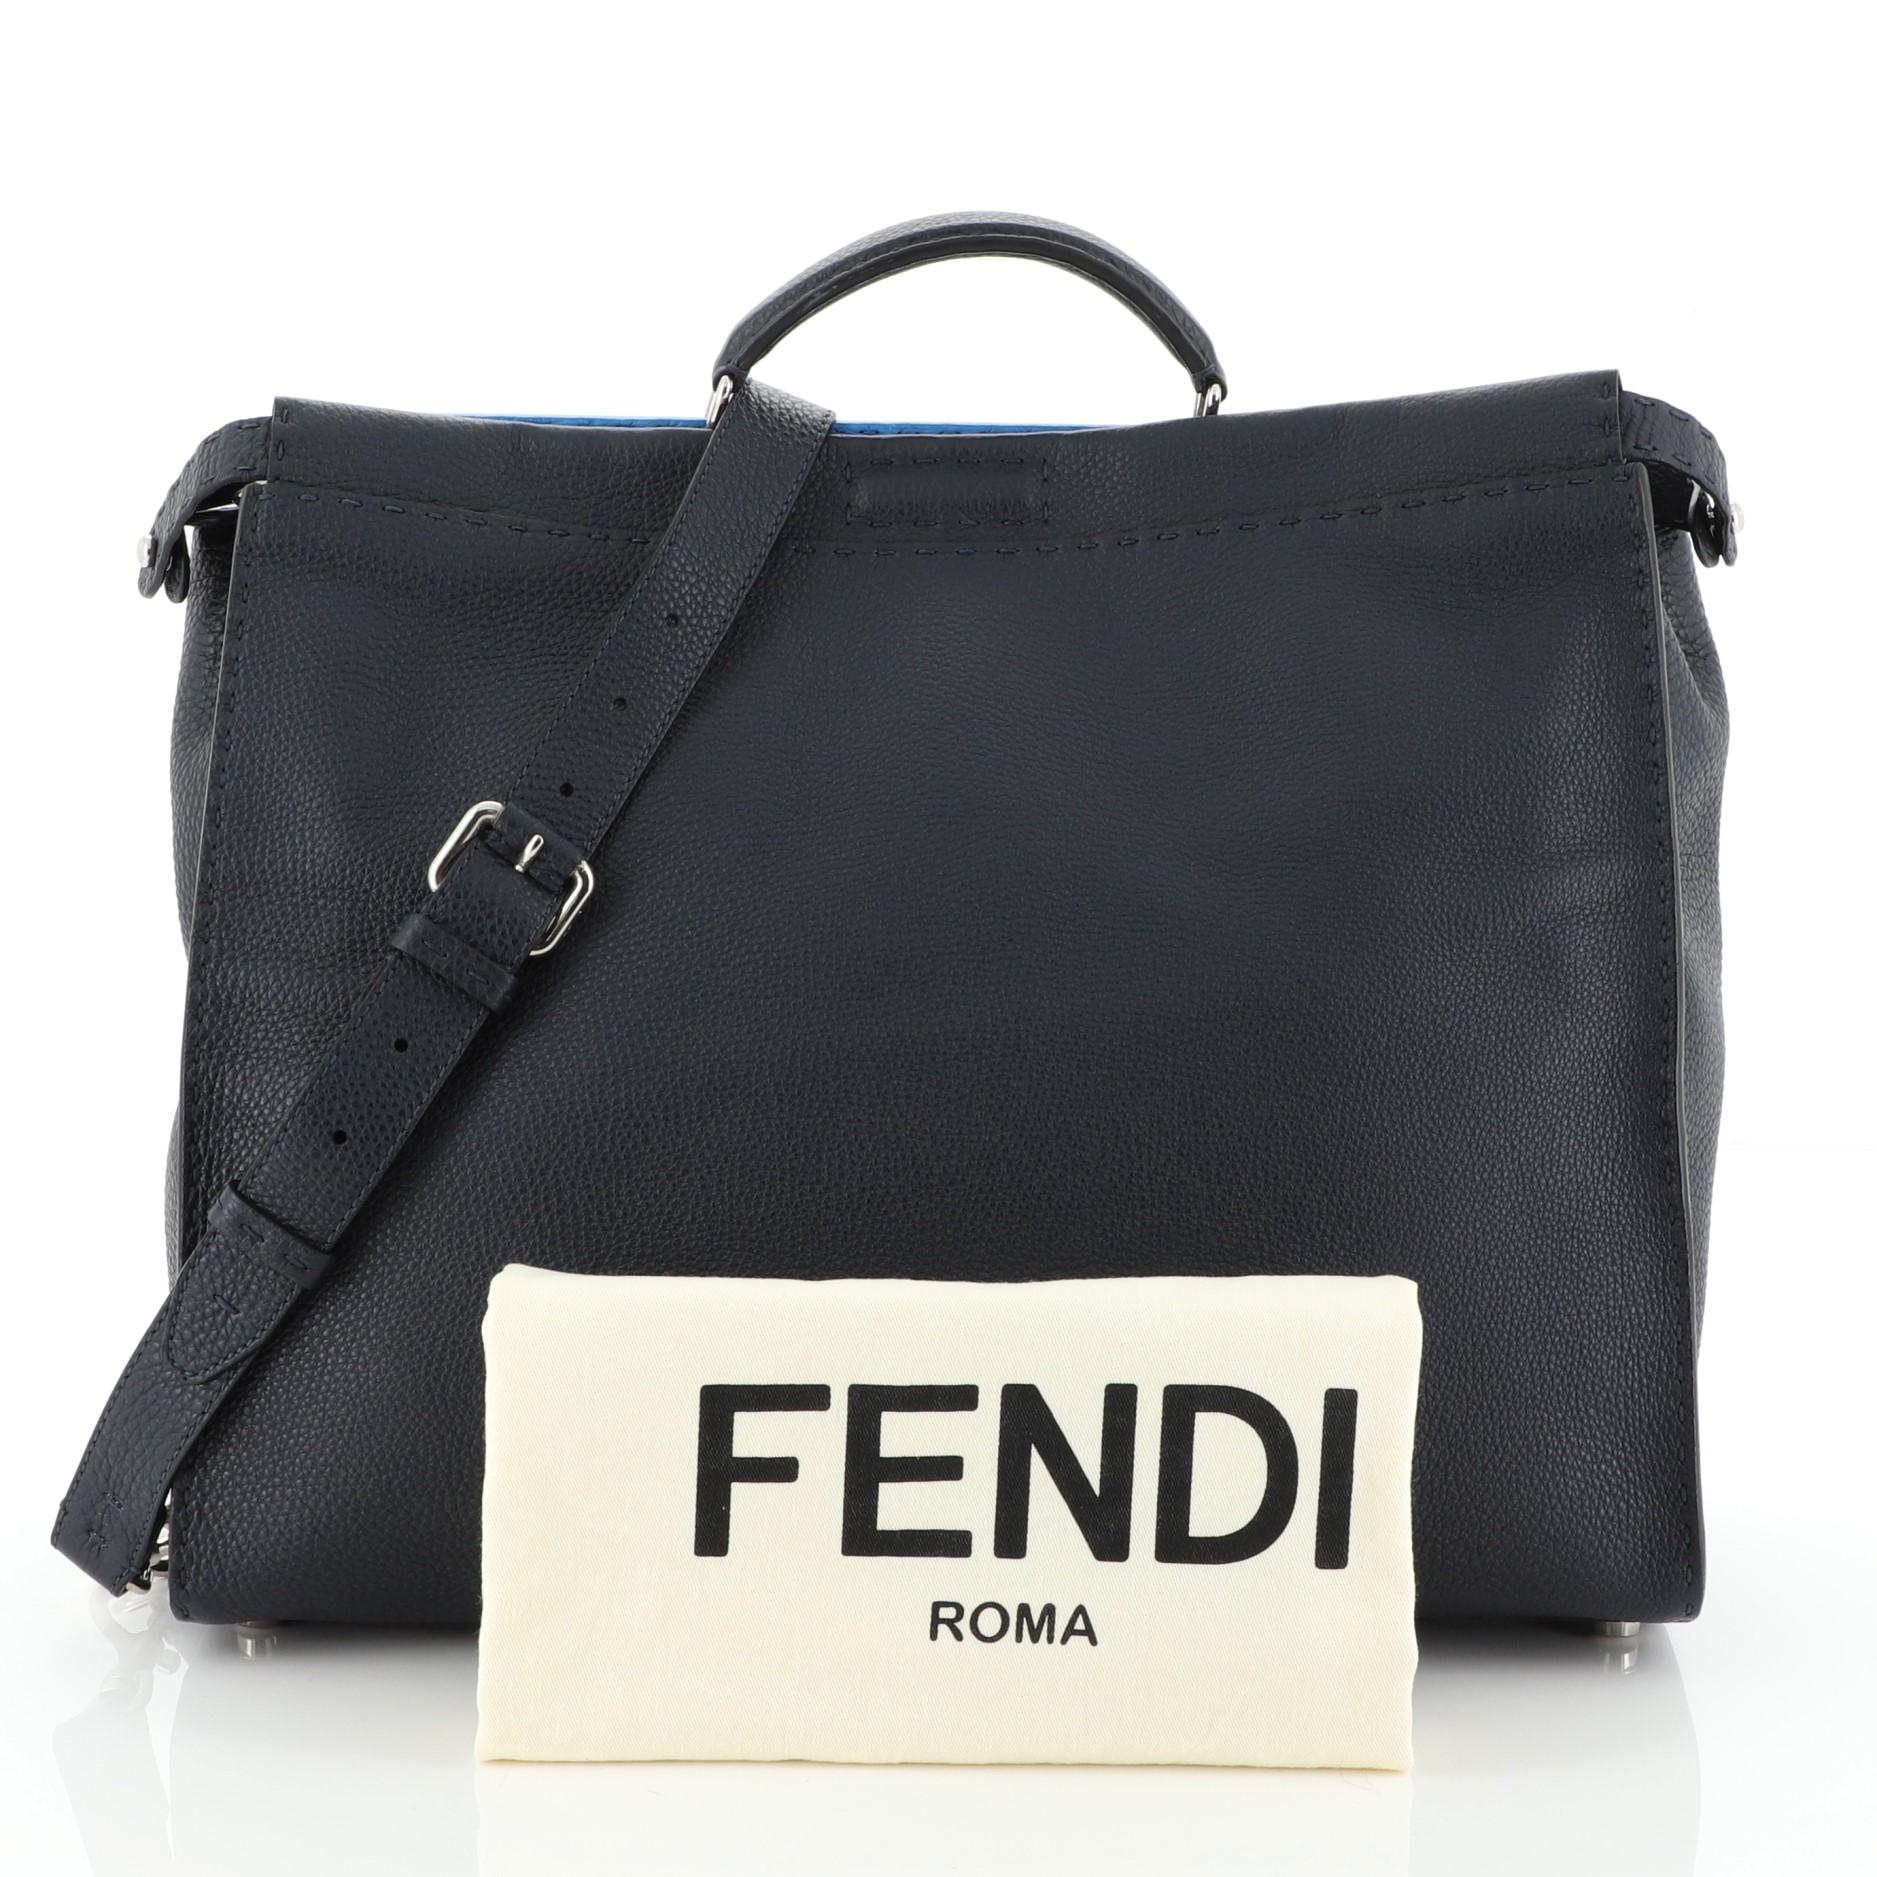 This Fendi Selleria Peekaboo Bag Leather XL, crafted from blue leather, features short leather top handle and silver-tone hardware. Its two compartments with press-lock and zip closures open to a black and blue microfiber interior with side zip